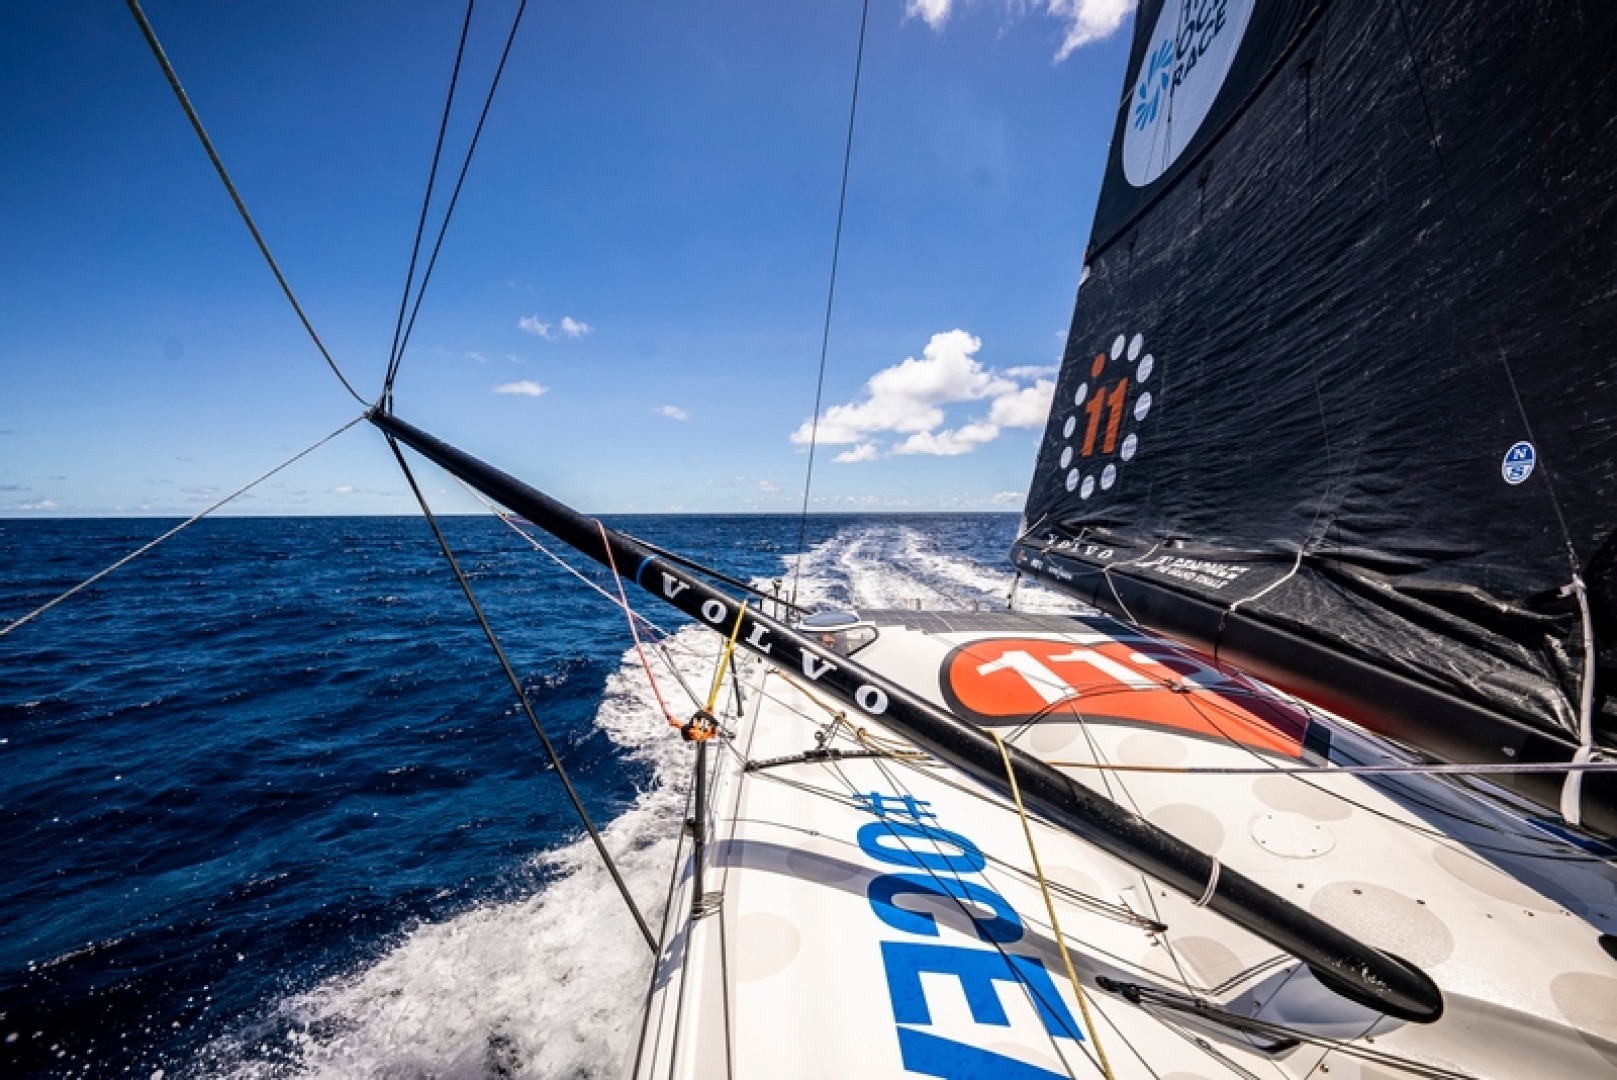 Onboard 11th Hour Racing Team during Leg 2, Day 11. Malama enjoying tradewind sailing at its finest. © Amory Ross / 11th Hour Racing / The Ocean Race